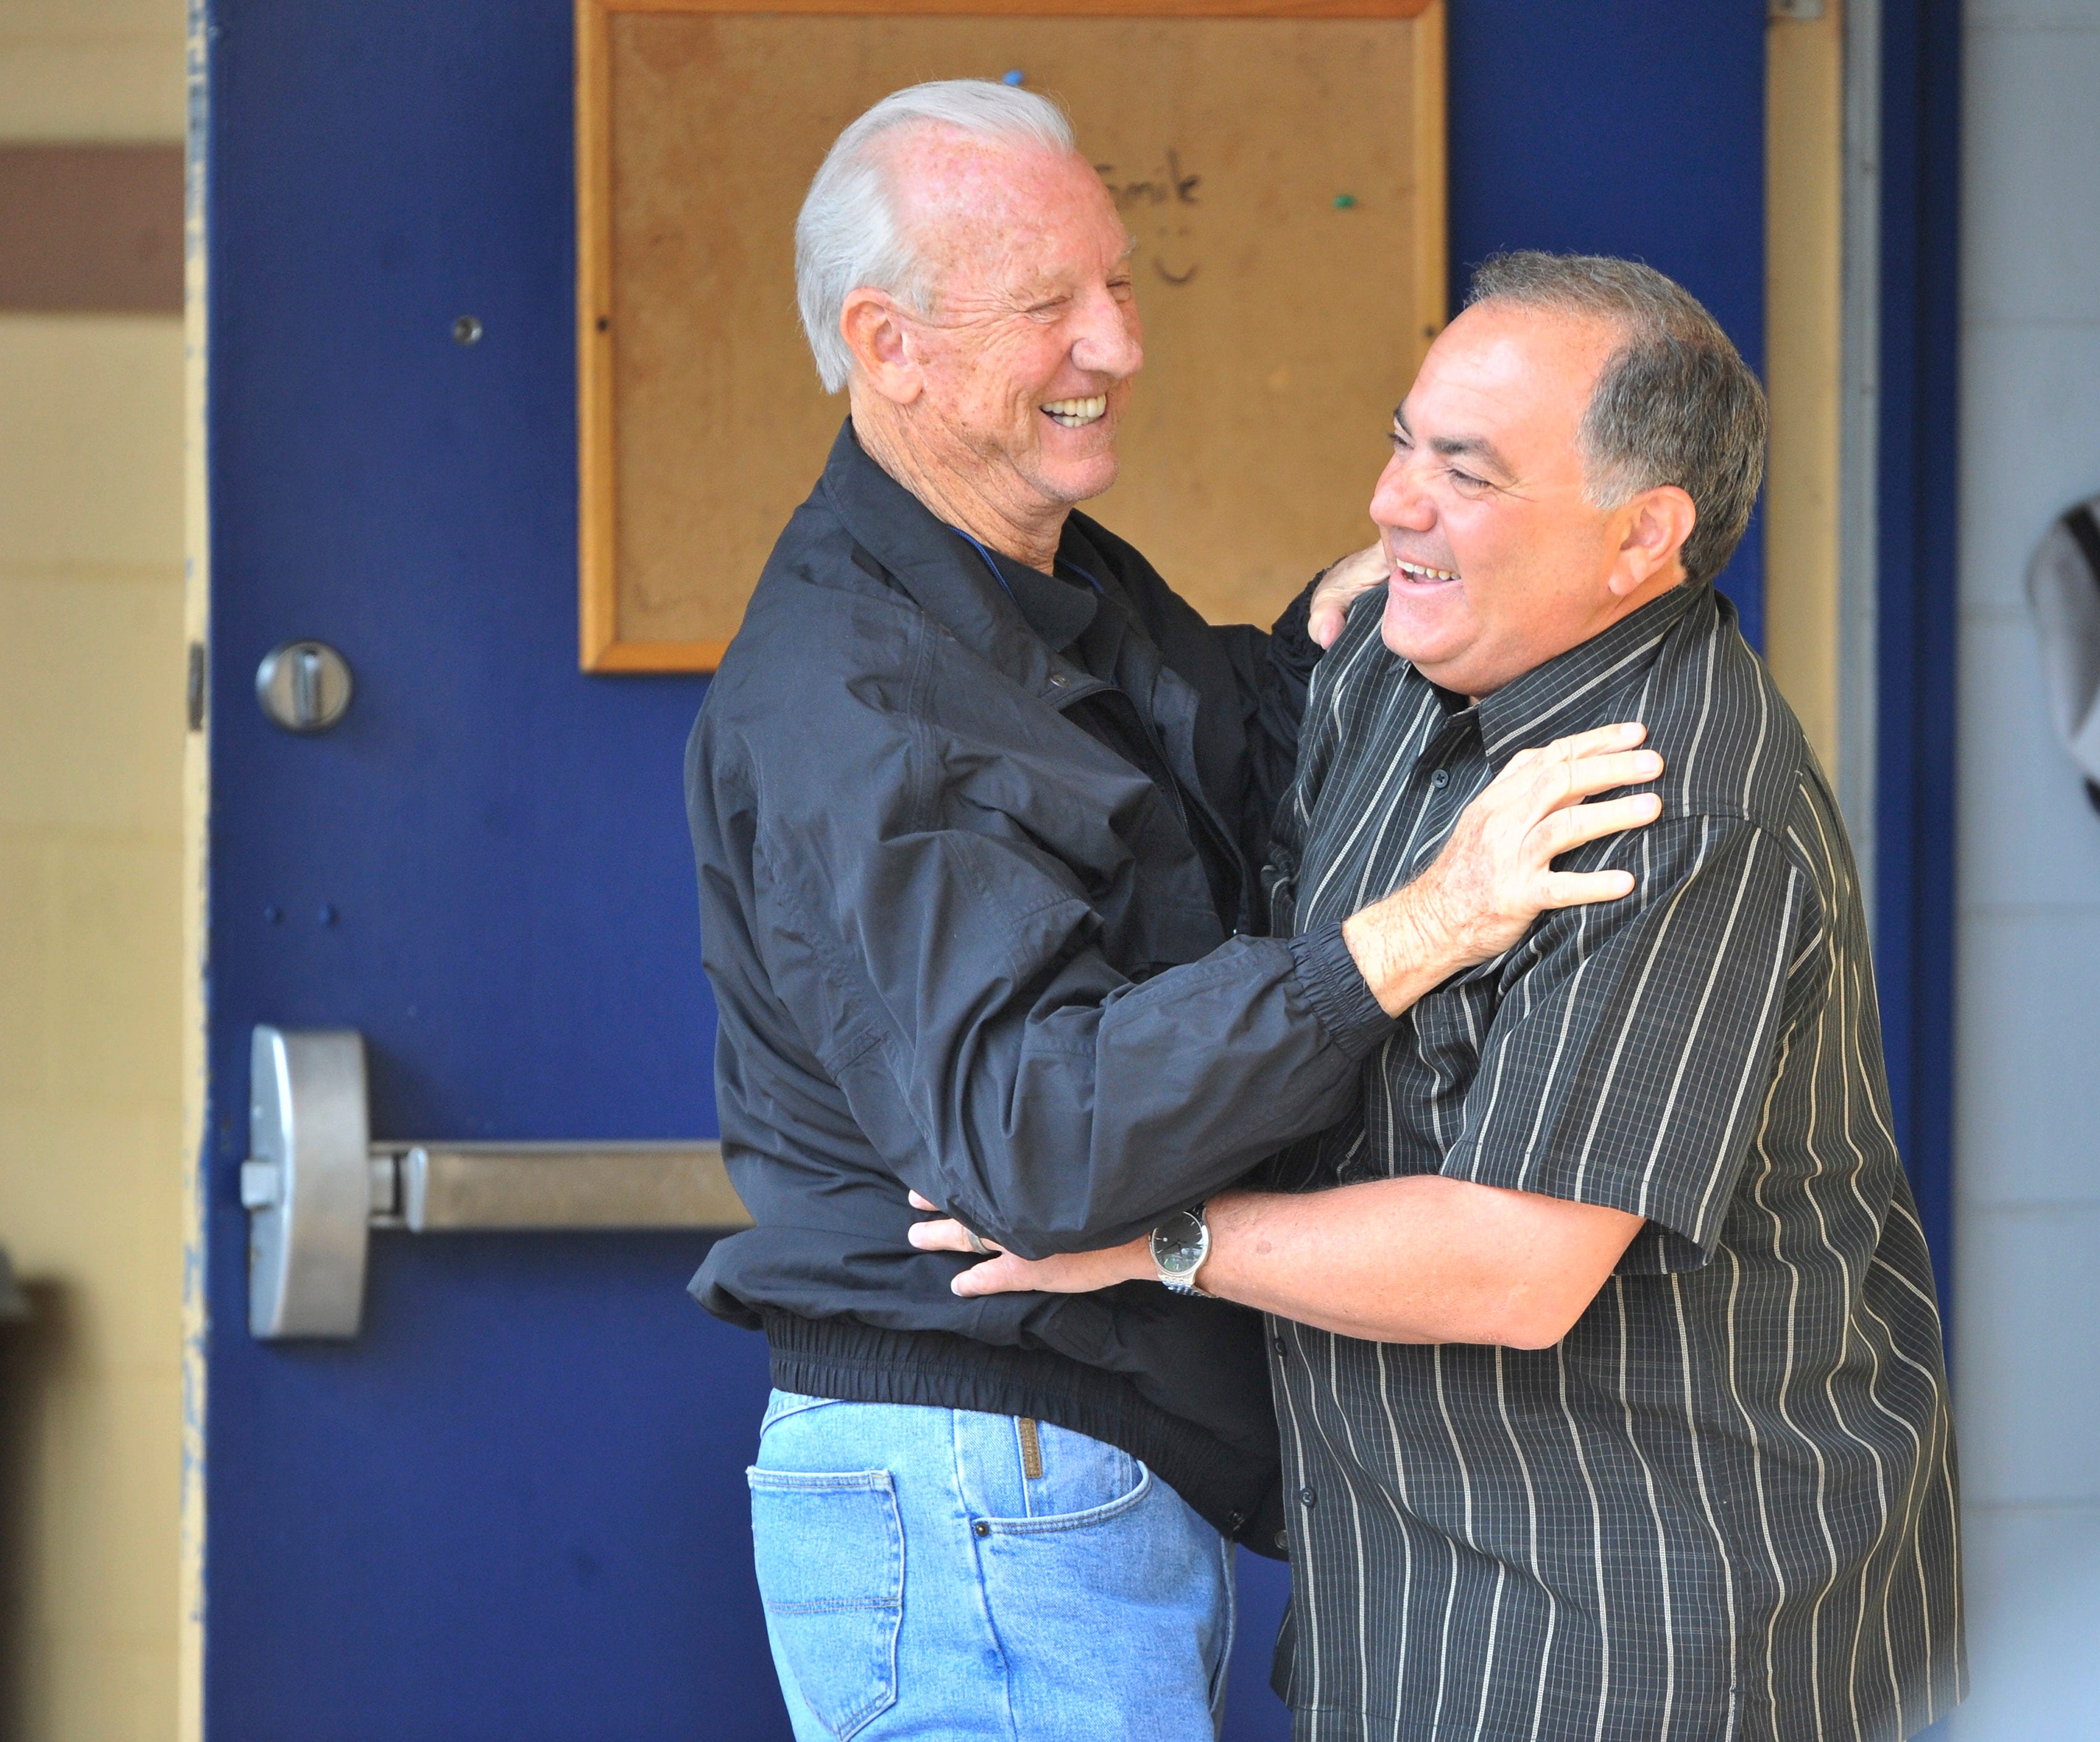 Detroit Tigers hall-of-famer and special assistant Al Kaline, left, has some fun with Al Avila, assistant general manager and vice president, outside the clubhouse before a spring training game against the Atlanta Braves at Joker Marchant Stadium in Lakeland, Fla. on Feb. 27, 2014.